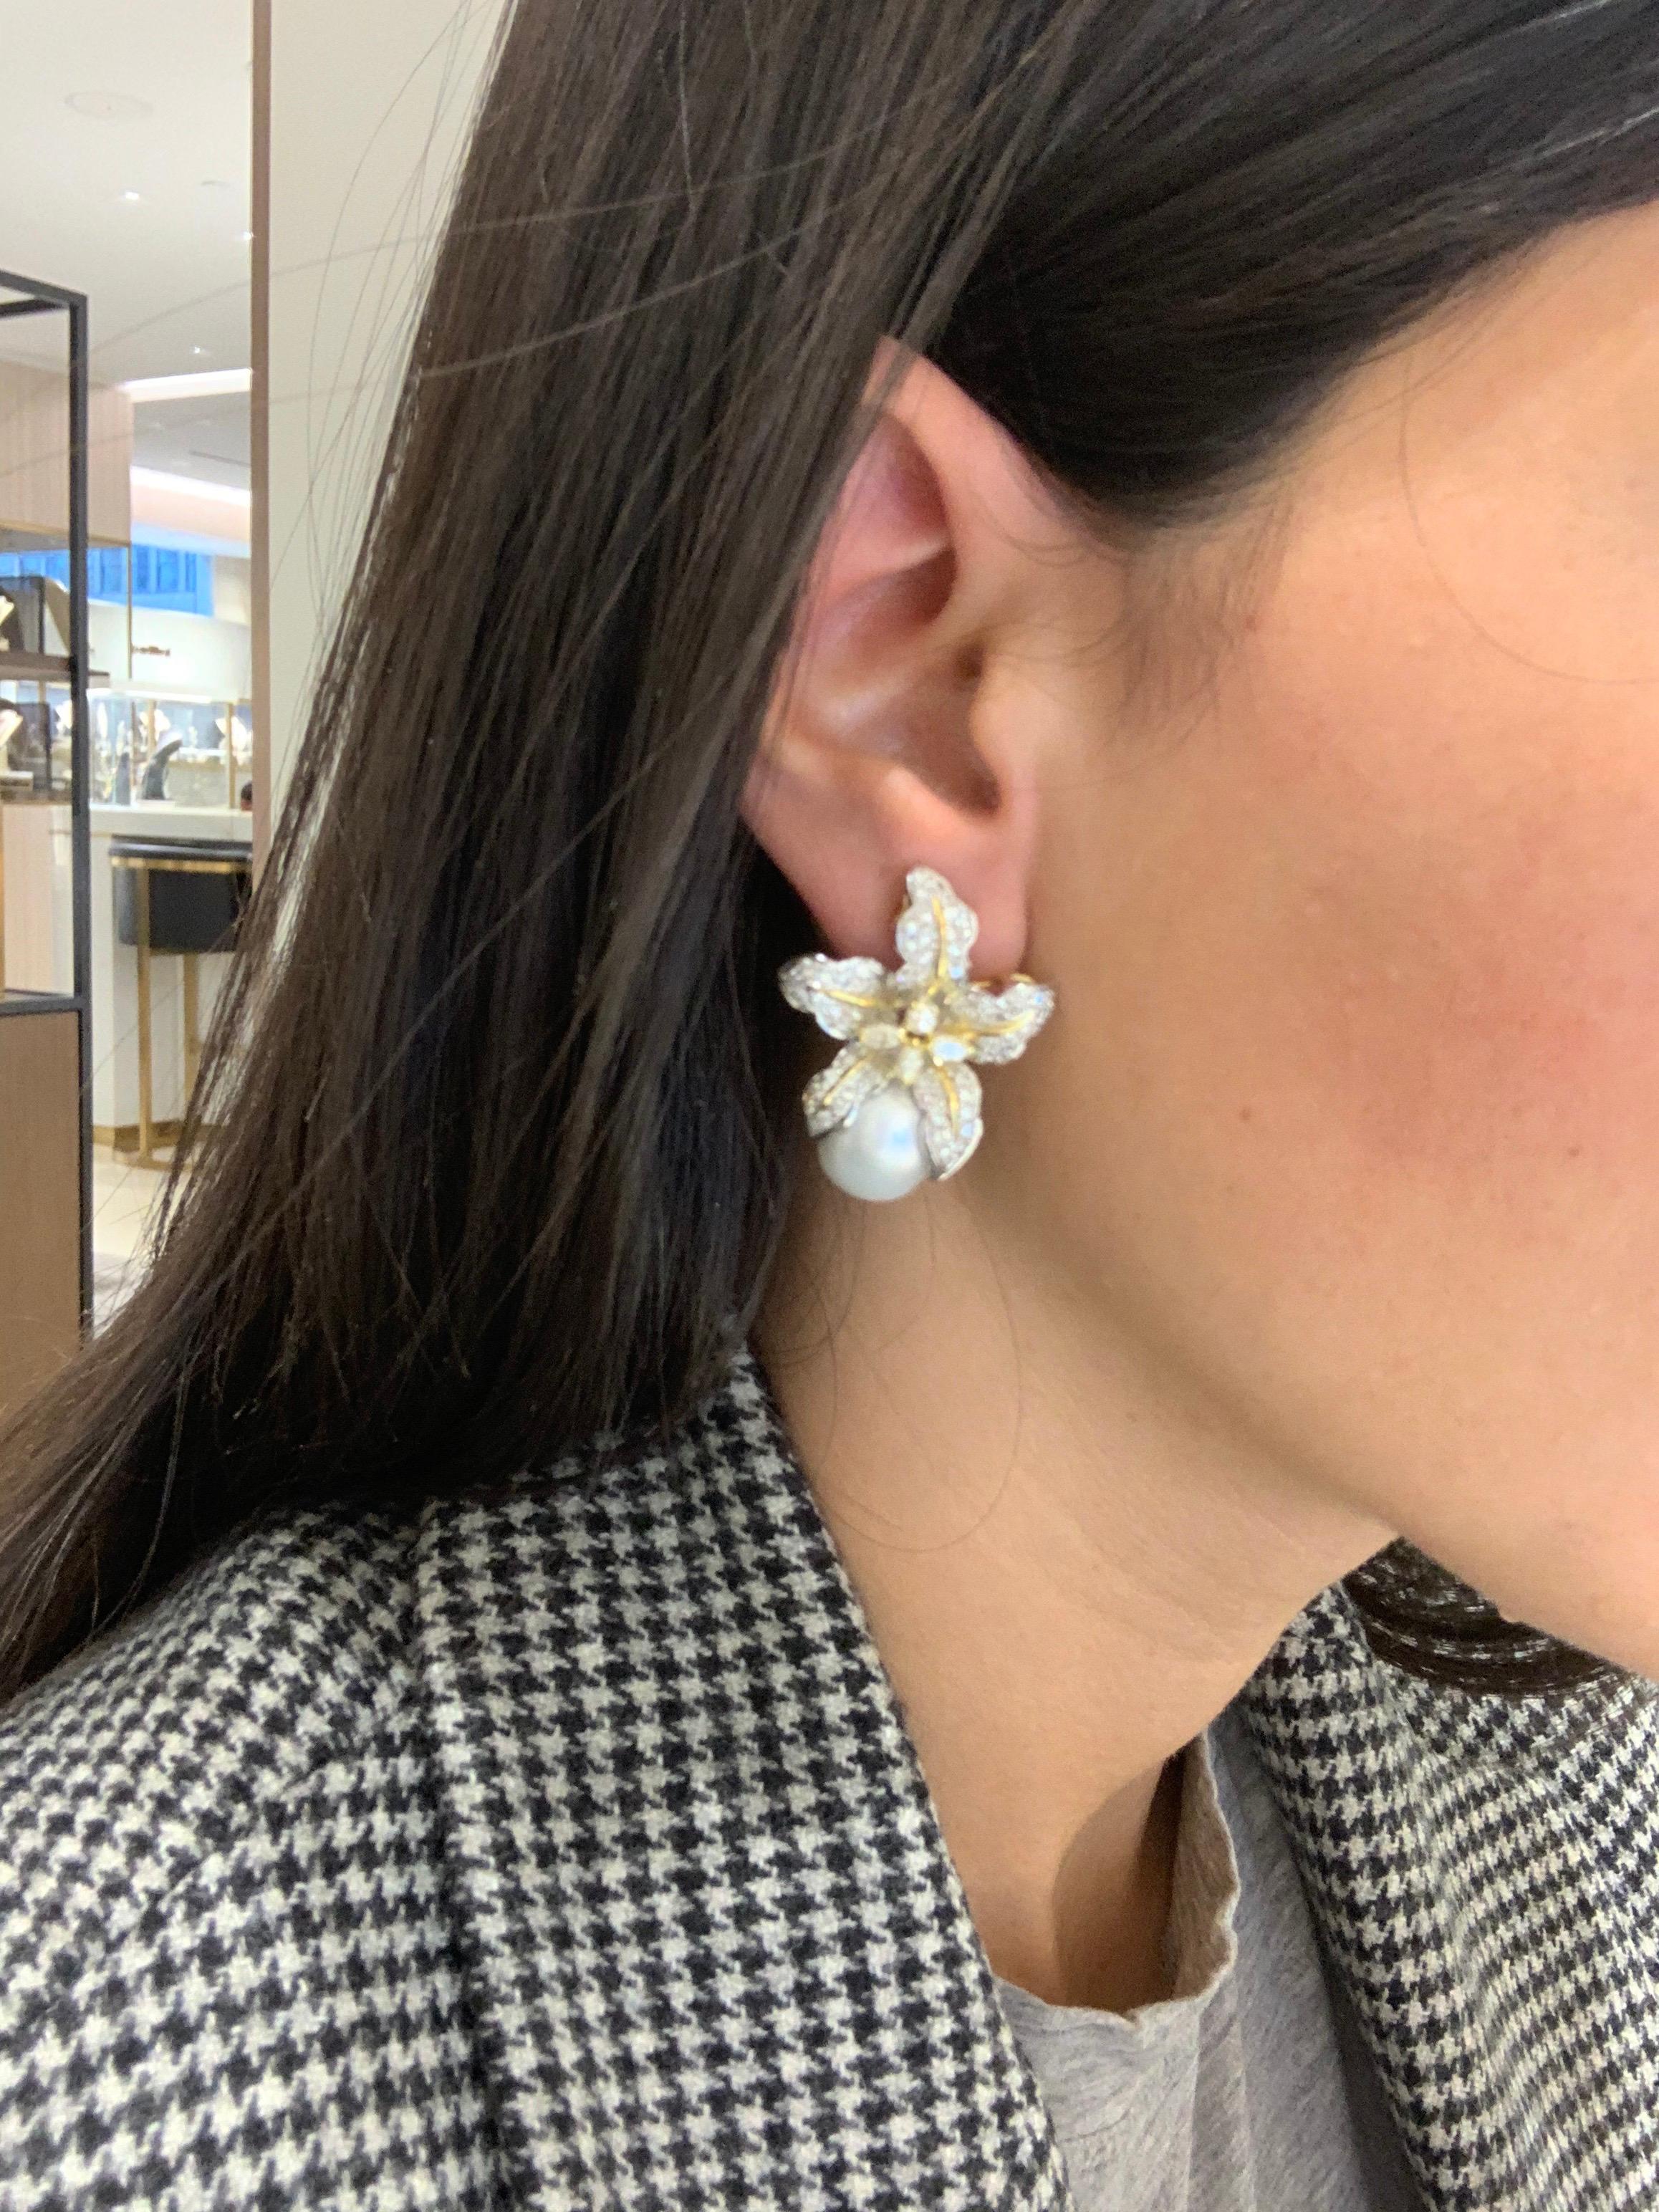 These lovely earrings are designed with a beautifully detailed orchid that has been set with round brilliant pave diamonds. The center area of the flower is prong set with 3 marquise cut and 1 round brilliant cut diamond. The setting is a